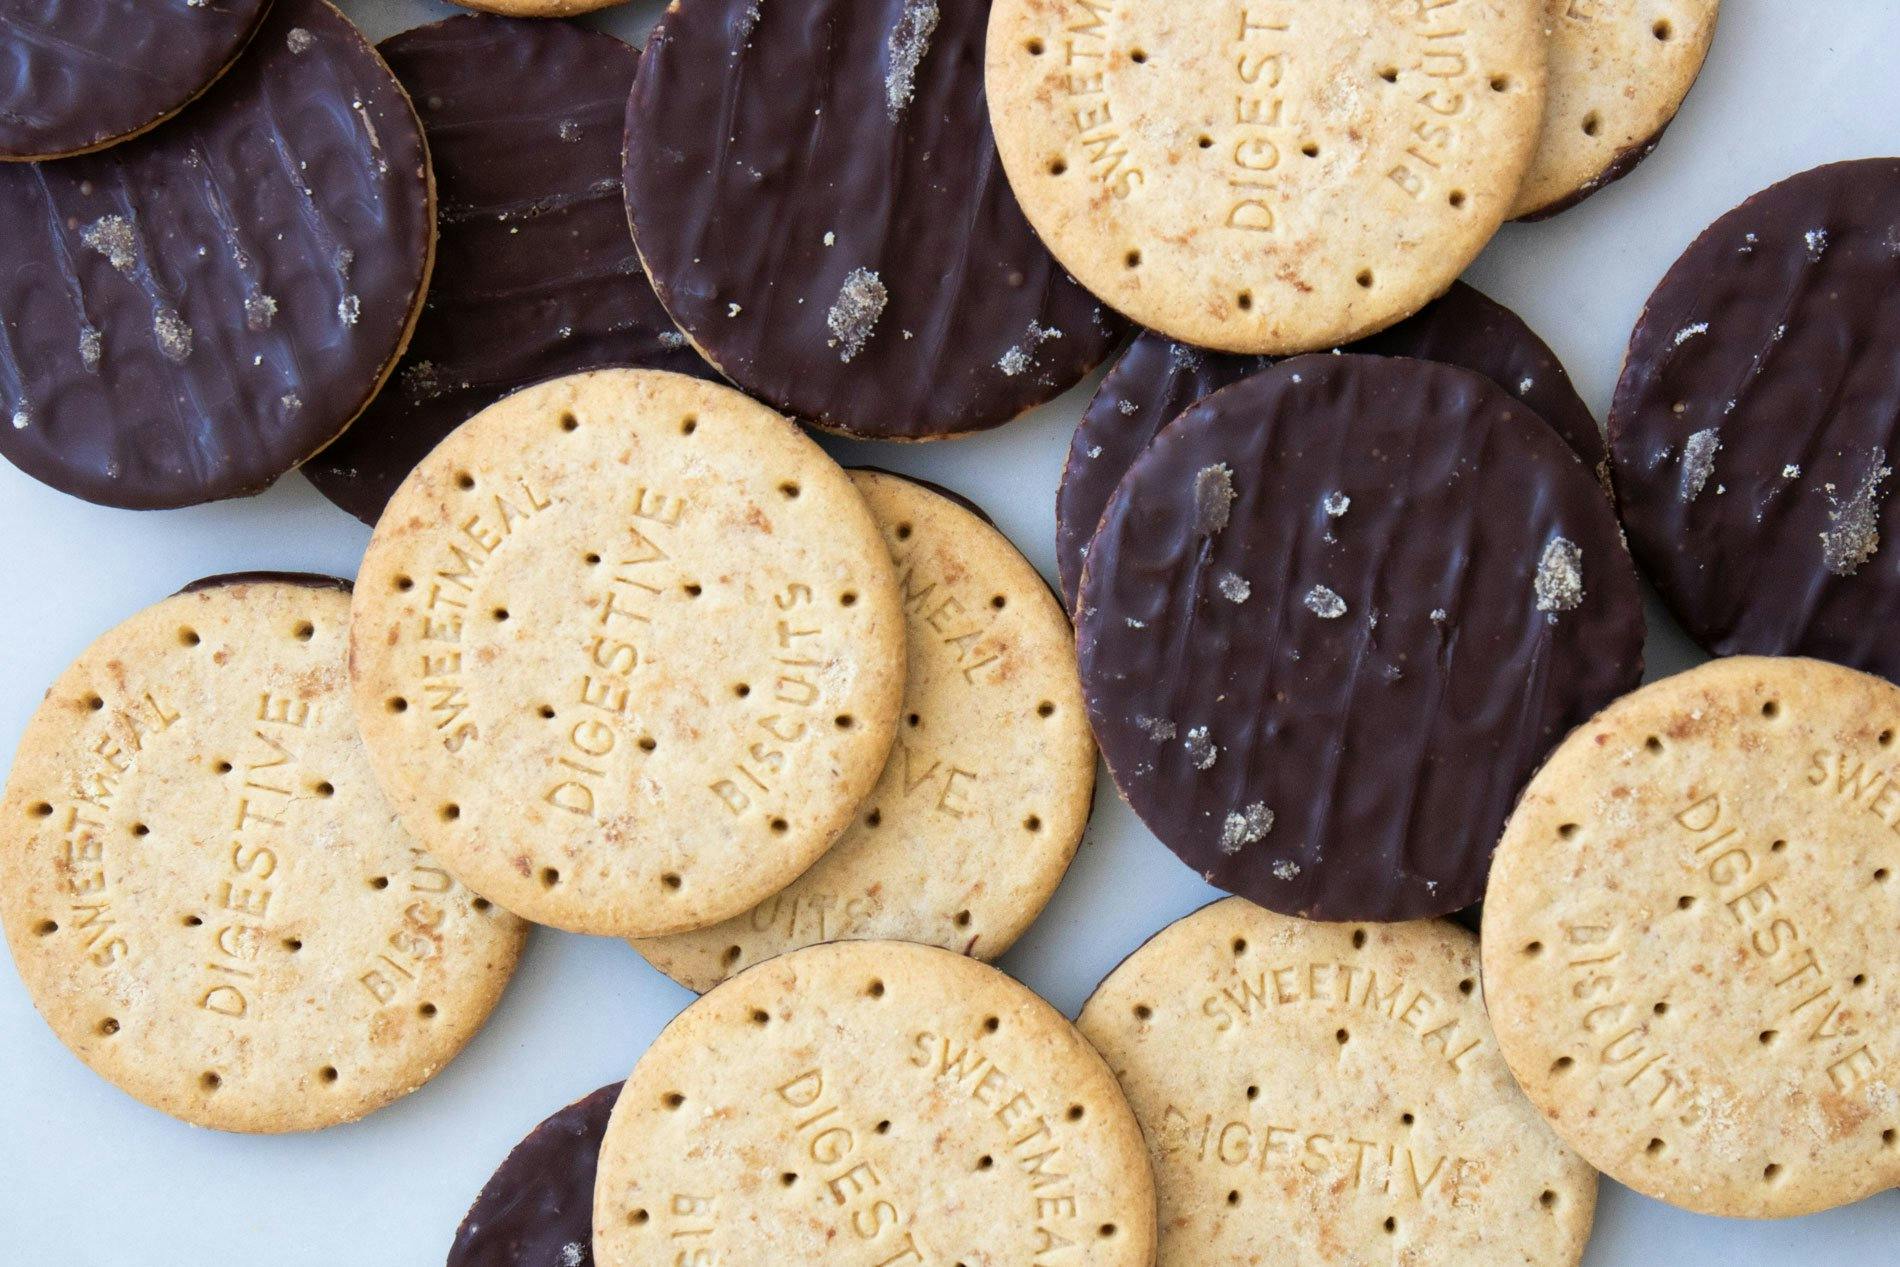 Close up image of chocolate digestives spread over a table.